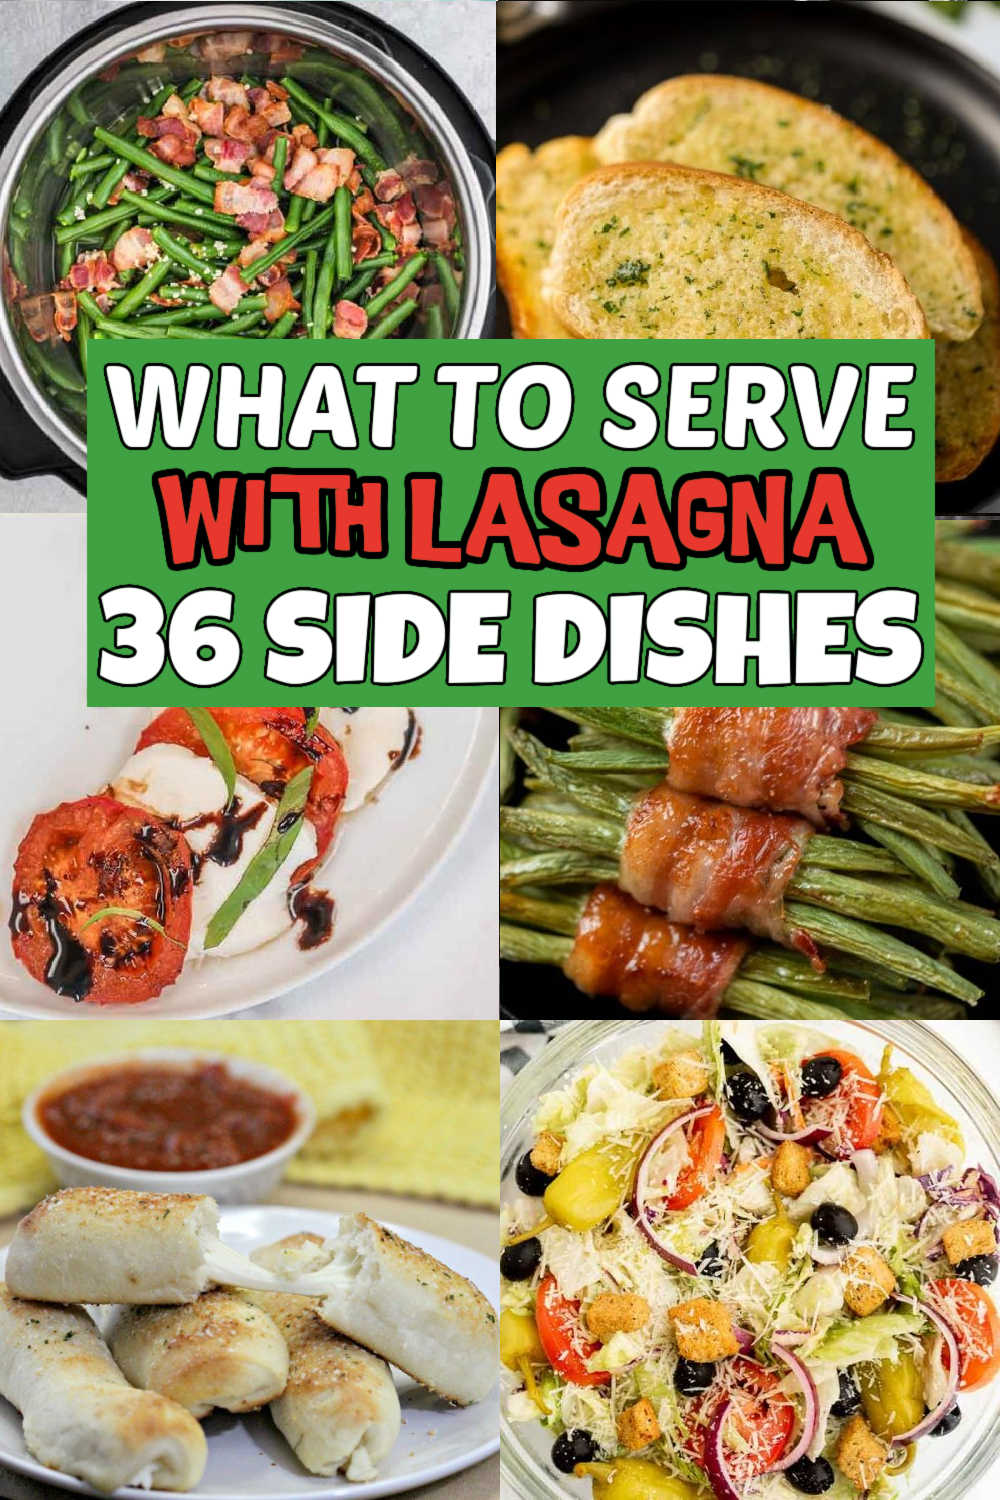 Make the best side dishes for lasagna that are easy and tasty. Learn 55 lasagna side dishes that will complete your meal. These easy side dish ideas will jazz up your lasagna dinner. Whether you want something light, something heavy, or something healthy, we have something for everyone. #eatingonadime #sidedishesforlasagna #lasagnasidedishes